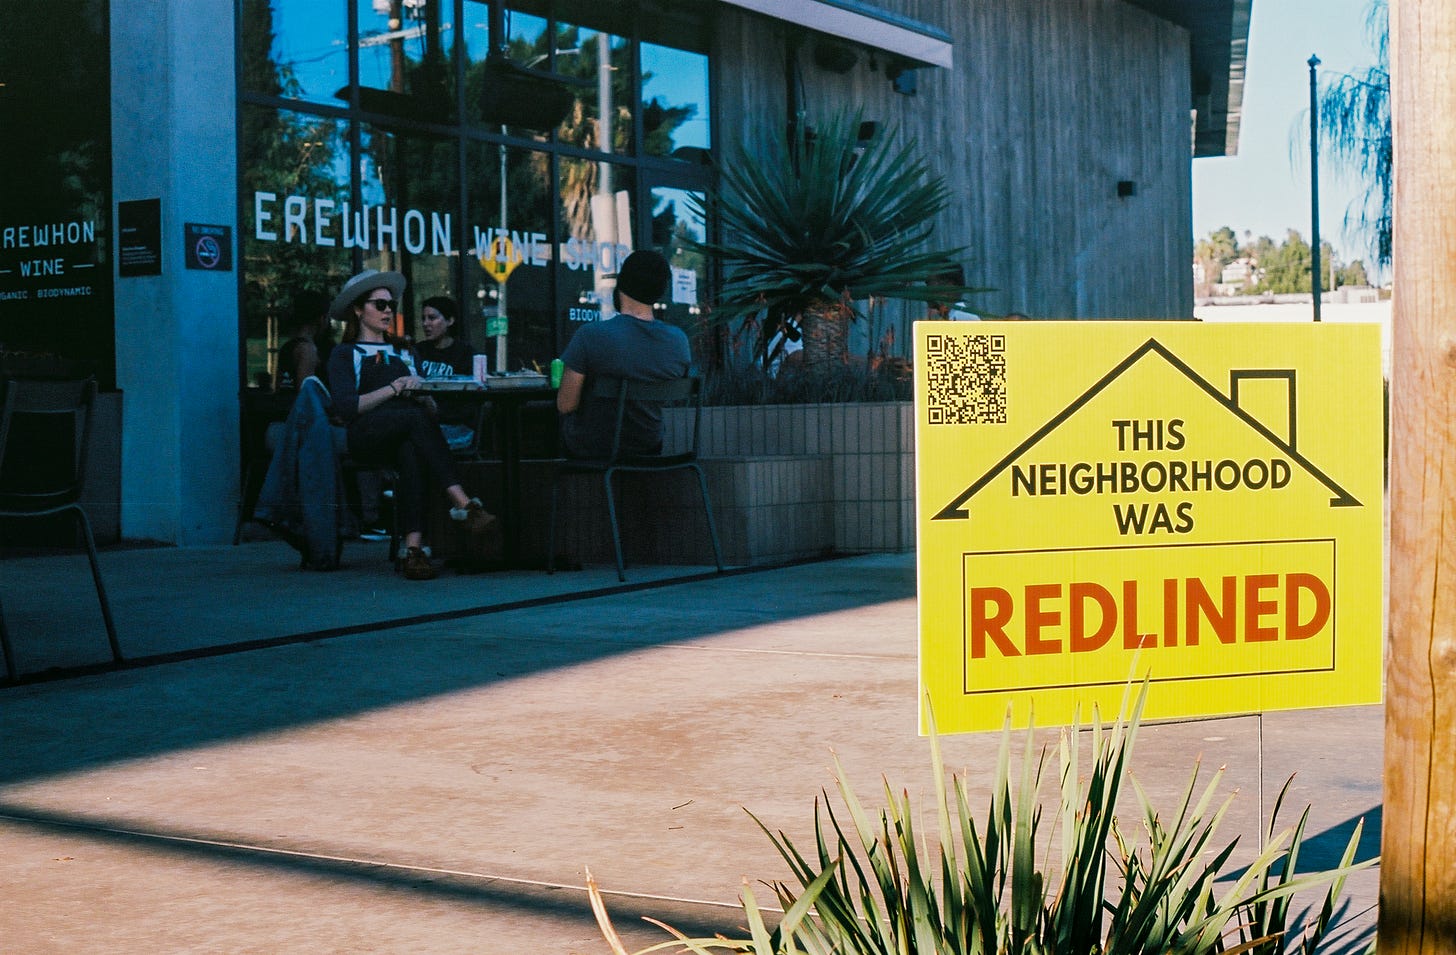 Photo of a redlining sign in front of Erewhon grocery store